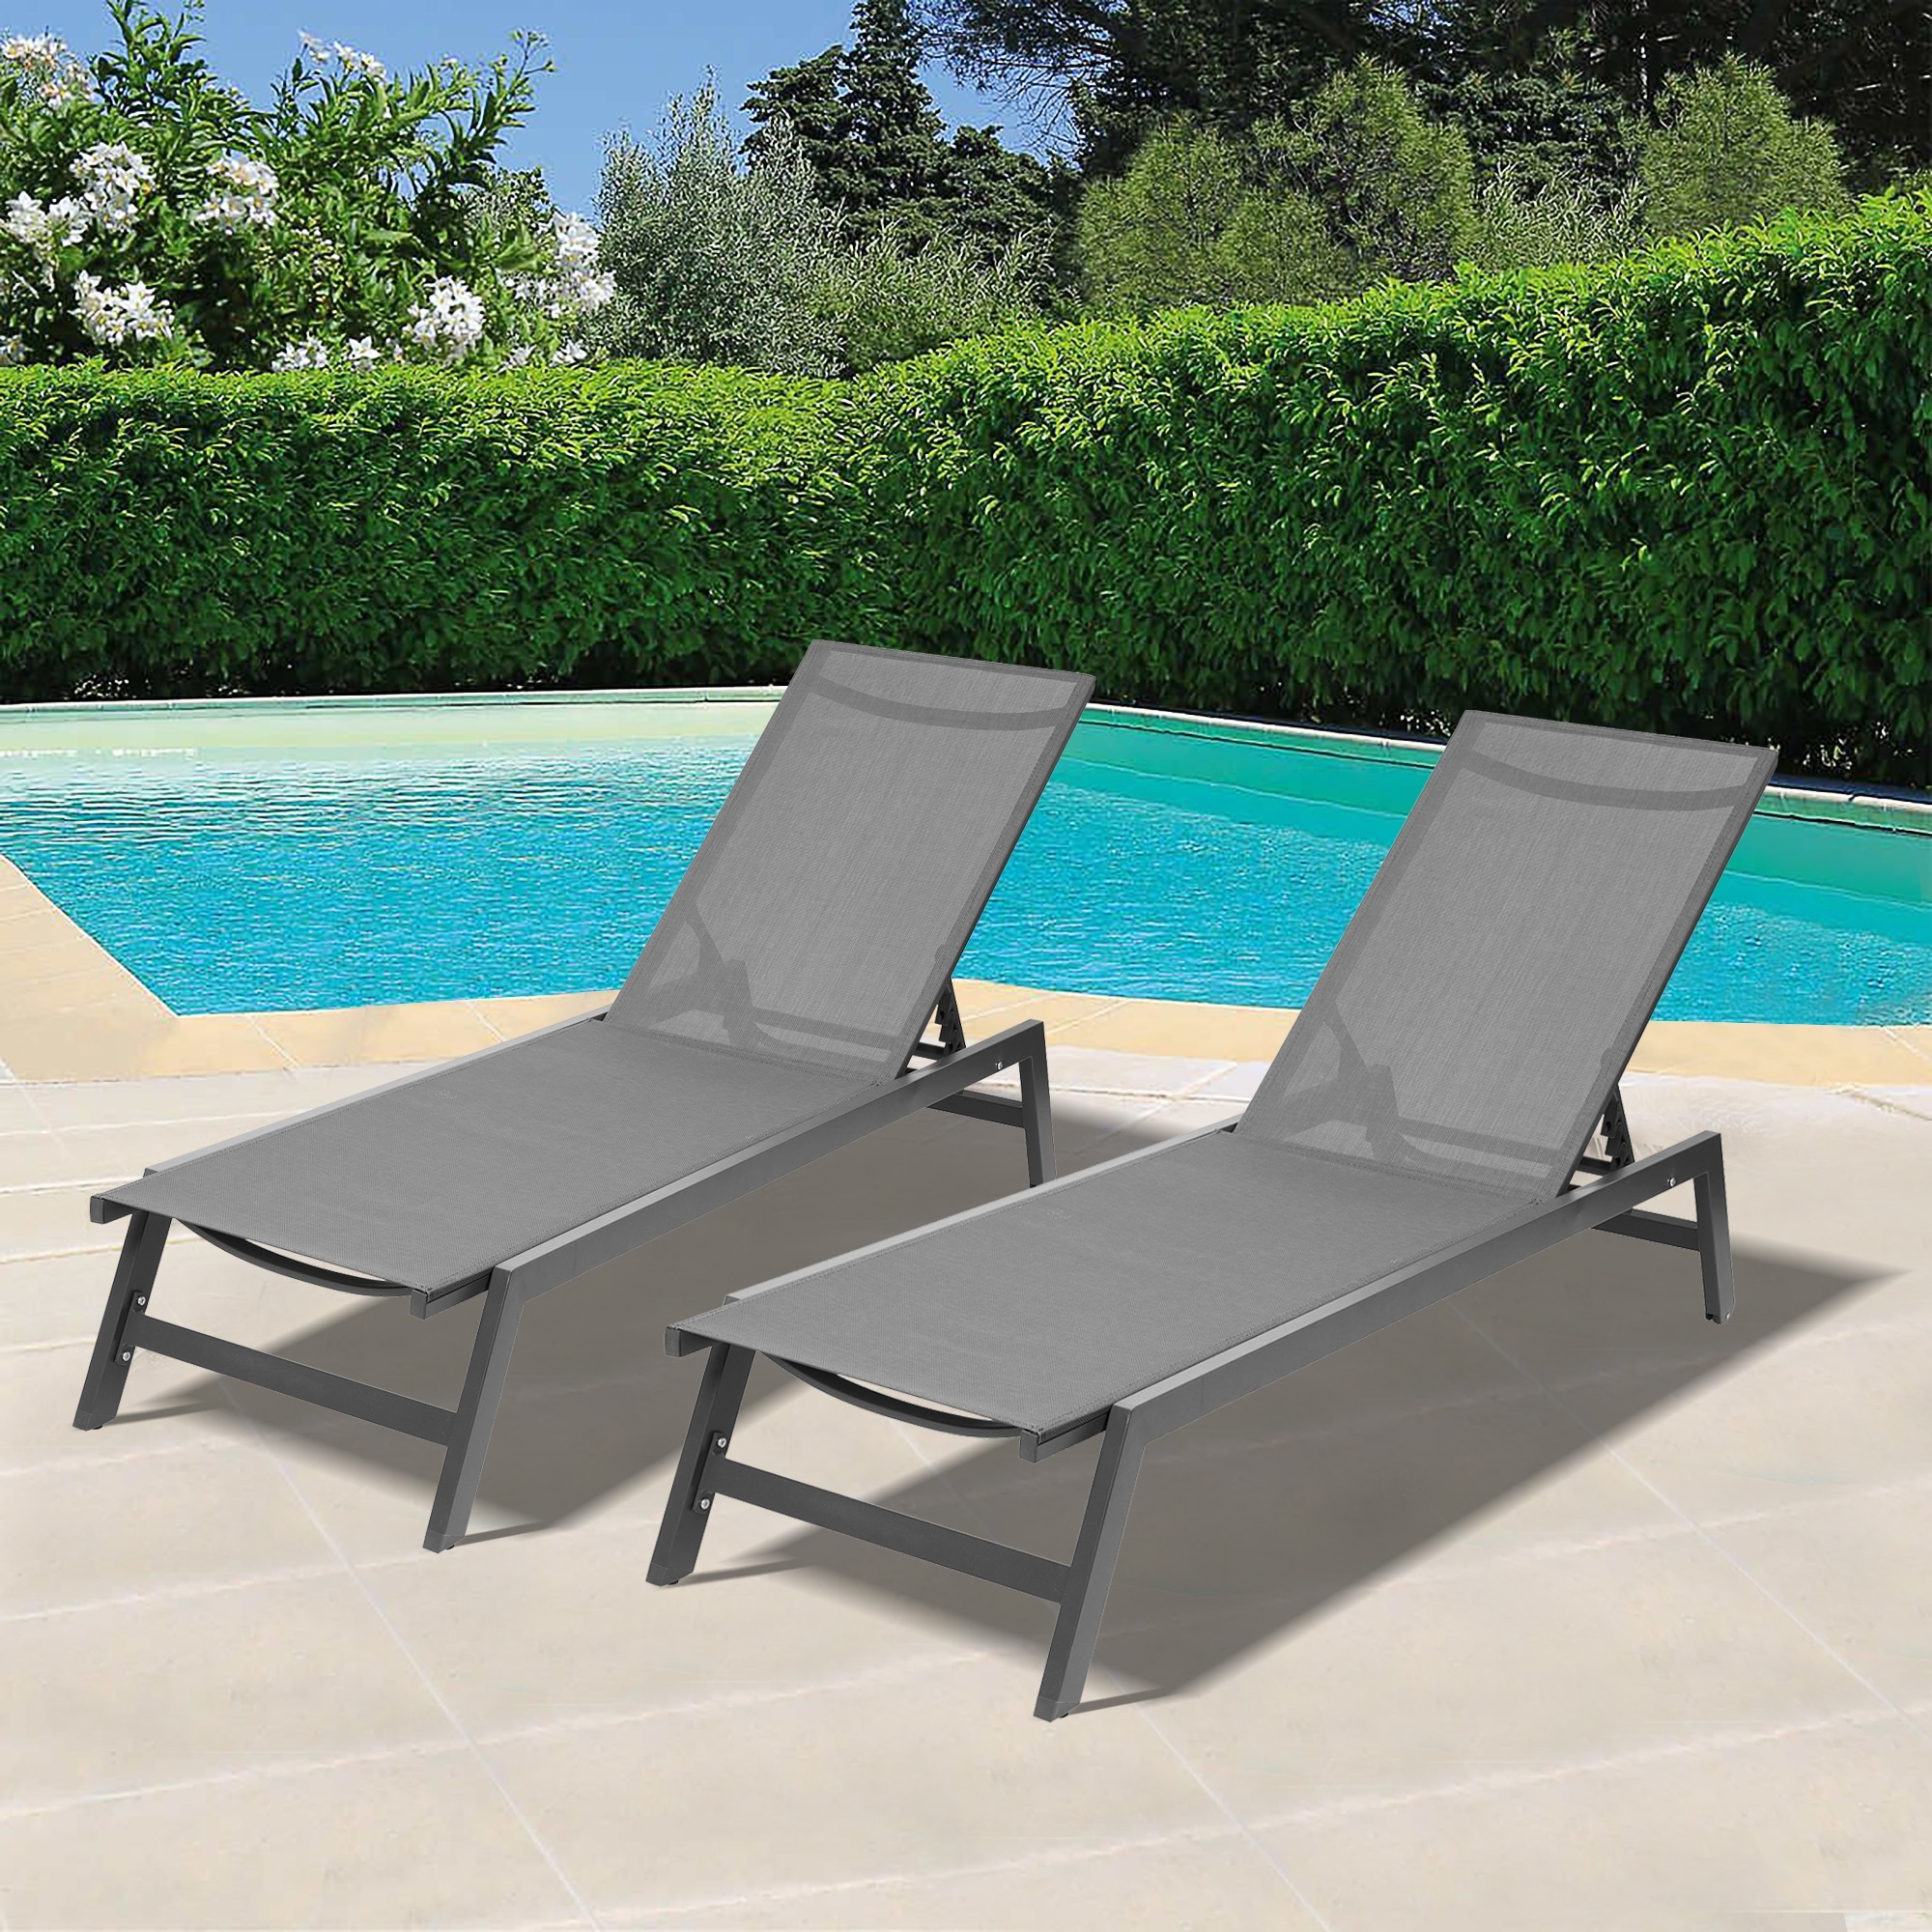 Outdoor 2-pcs Set Chaise Lounge Chairs five-position Adjustable Aluminum Recliner all Weather For Patio beach yard pool